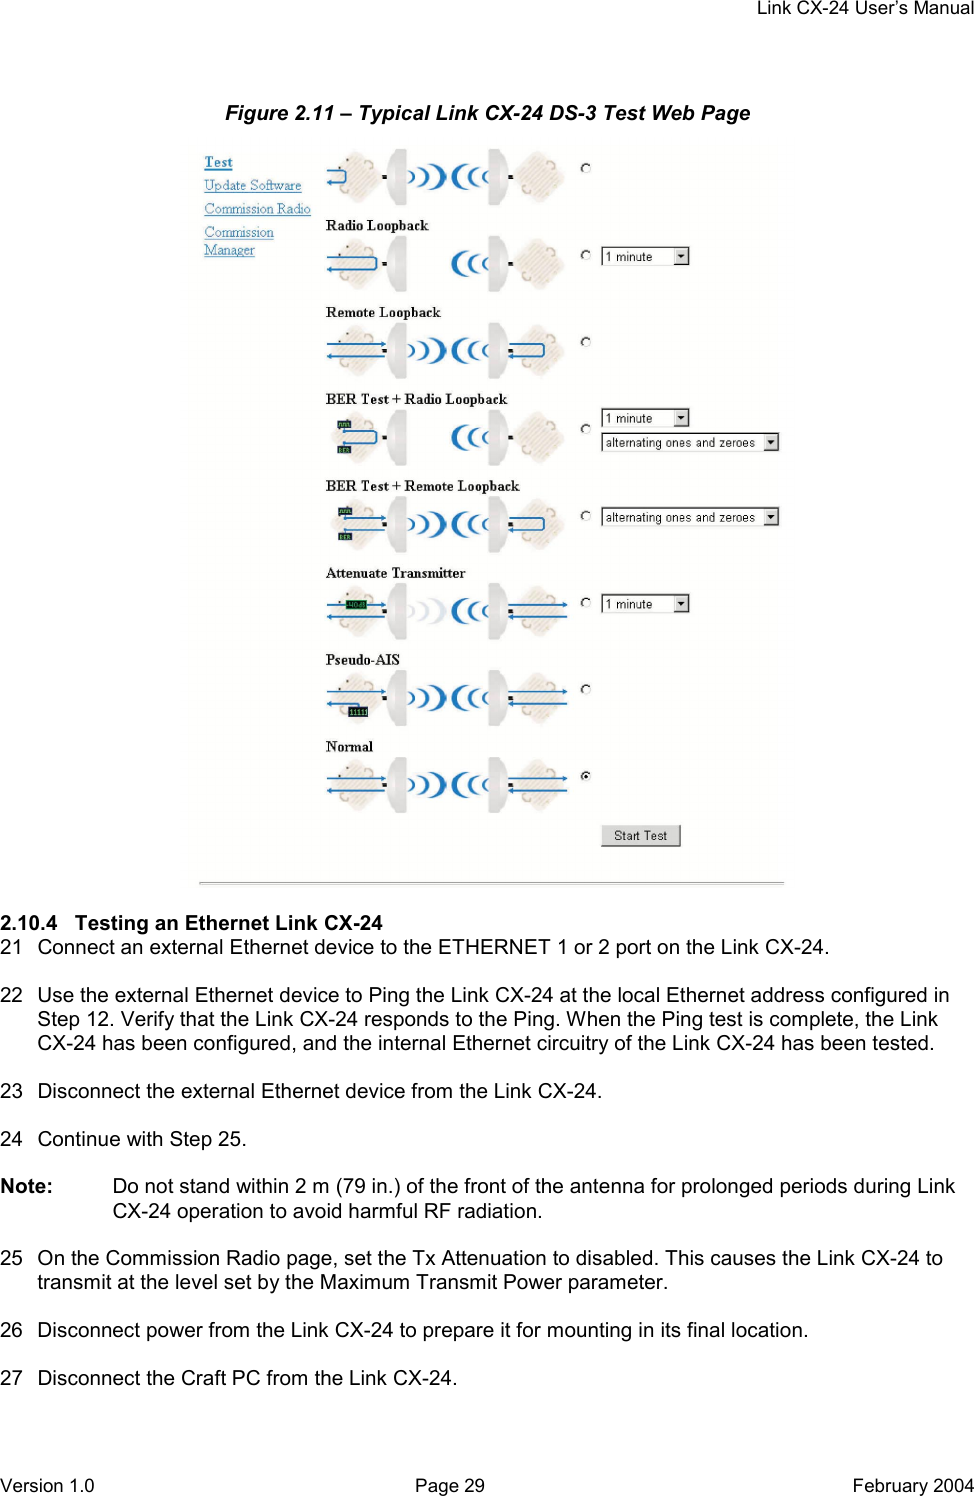     Link CX-24 User’s Manual Version 1.0  Page 29  February 2004 Figure 2.11 – Typical Link CX-24 DS-3 Test Web Page   2.10.4  Testing an Ethernet Link CX-24 21  Connect an external Ethernet device to the ETHERNET 1 or 2 port on the Link CX-24.  22  Use the external Ethernet device to Ping the Link CX-24 at the local Ethernet address configured in Step 12. Verify that the Link CX-24 responds to the Ping. When the Ping test is complete, the Link CX-24 has been configured, and the internal Ethernet circuitry of the Link CX-24 has been tested.  23  Disconnect the external Ethernet device from the Link CX-24.  24  Continue with Step 25.  Note:  Do not stand within 2 m (79 in.) of the front of the antenna for prolonged periods during Link CX-24 operation to avoid harmful RF radiation.  25  On the Commission Radio page, set the Tx Attenuation to disabled. This causes the Link CX-24 to transmit at the level set by the Maximum Transmit Power parameter.  26  Disconnect power from the Link CX-24 to prepare it for mounting in its final location.  27  Disconnect the Craft PC from the Link CX-24.  